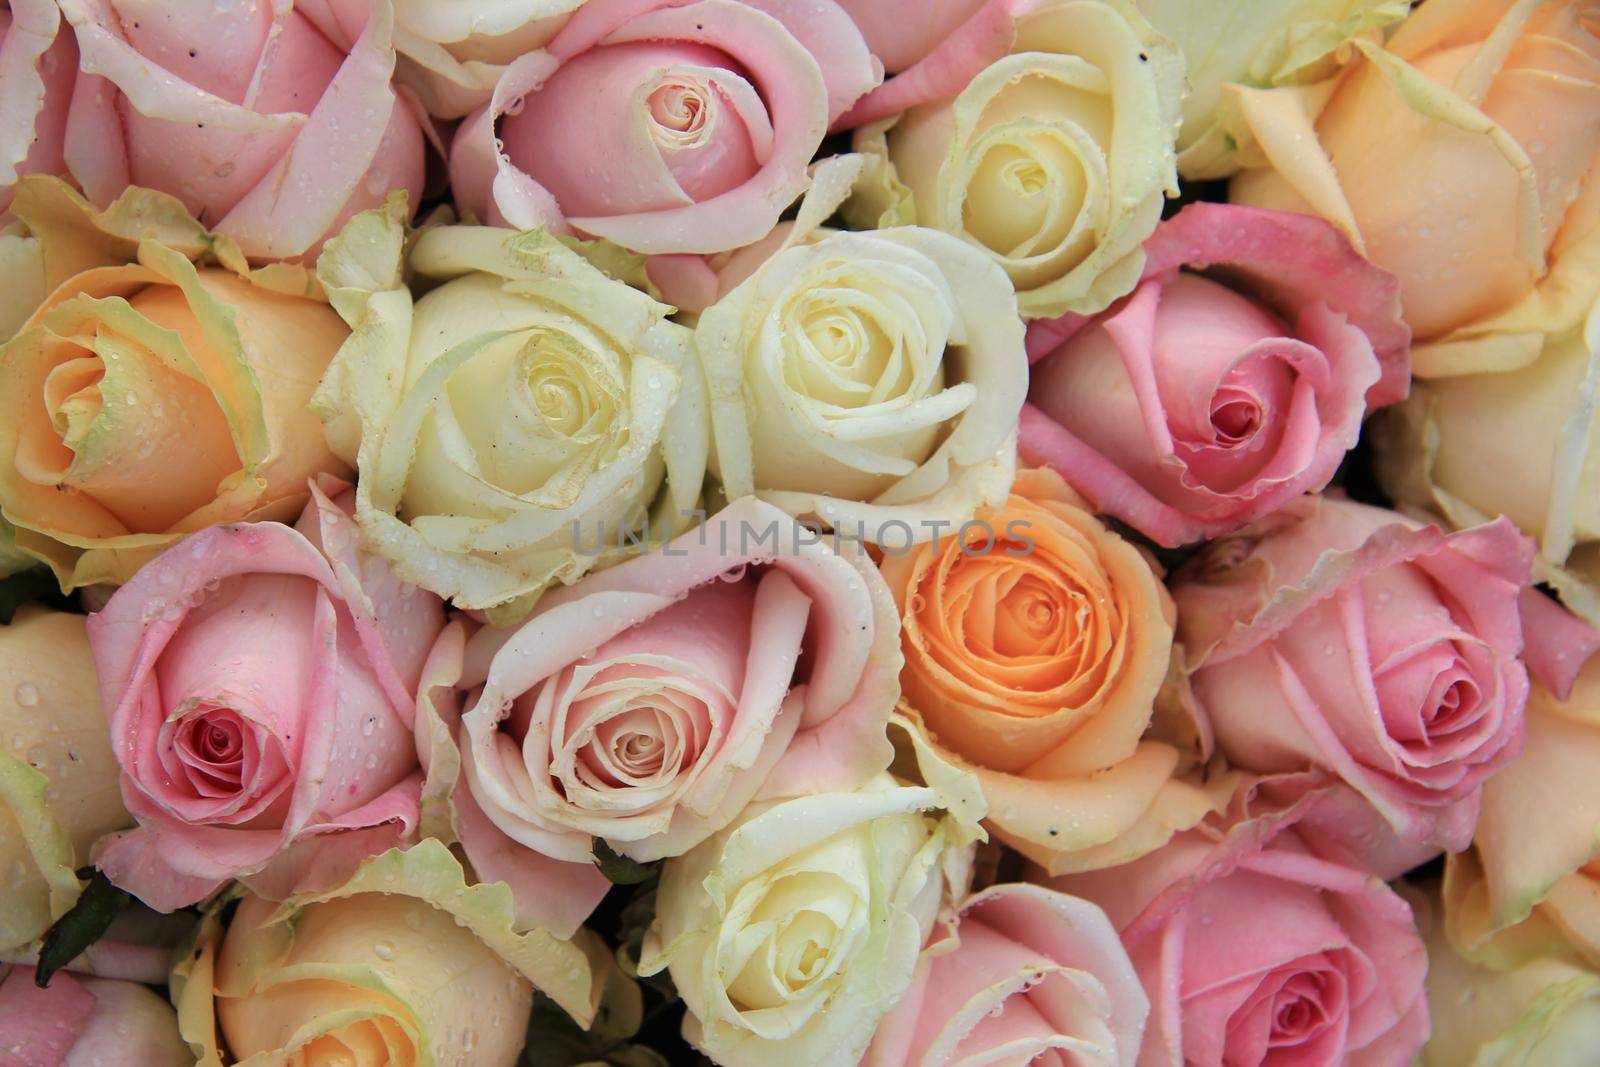 Pink, orange and white roses in a mixed bridal bouquet by studioportosabbia